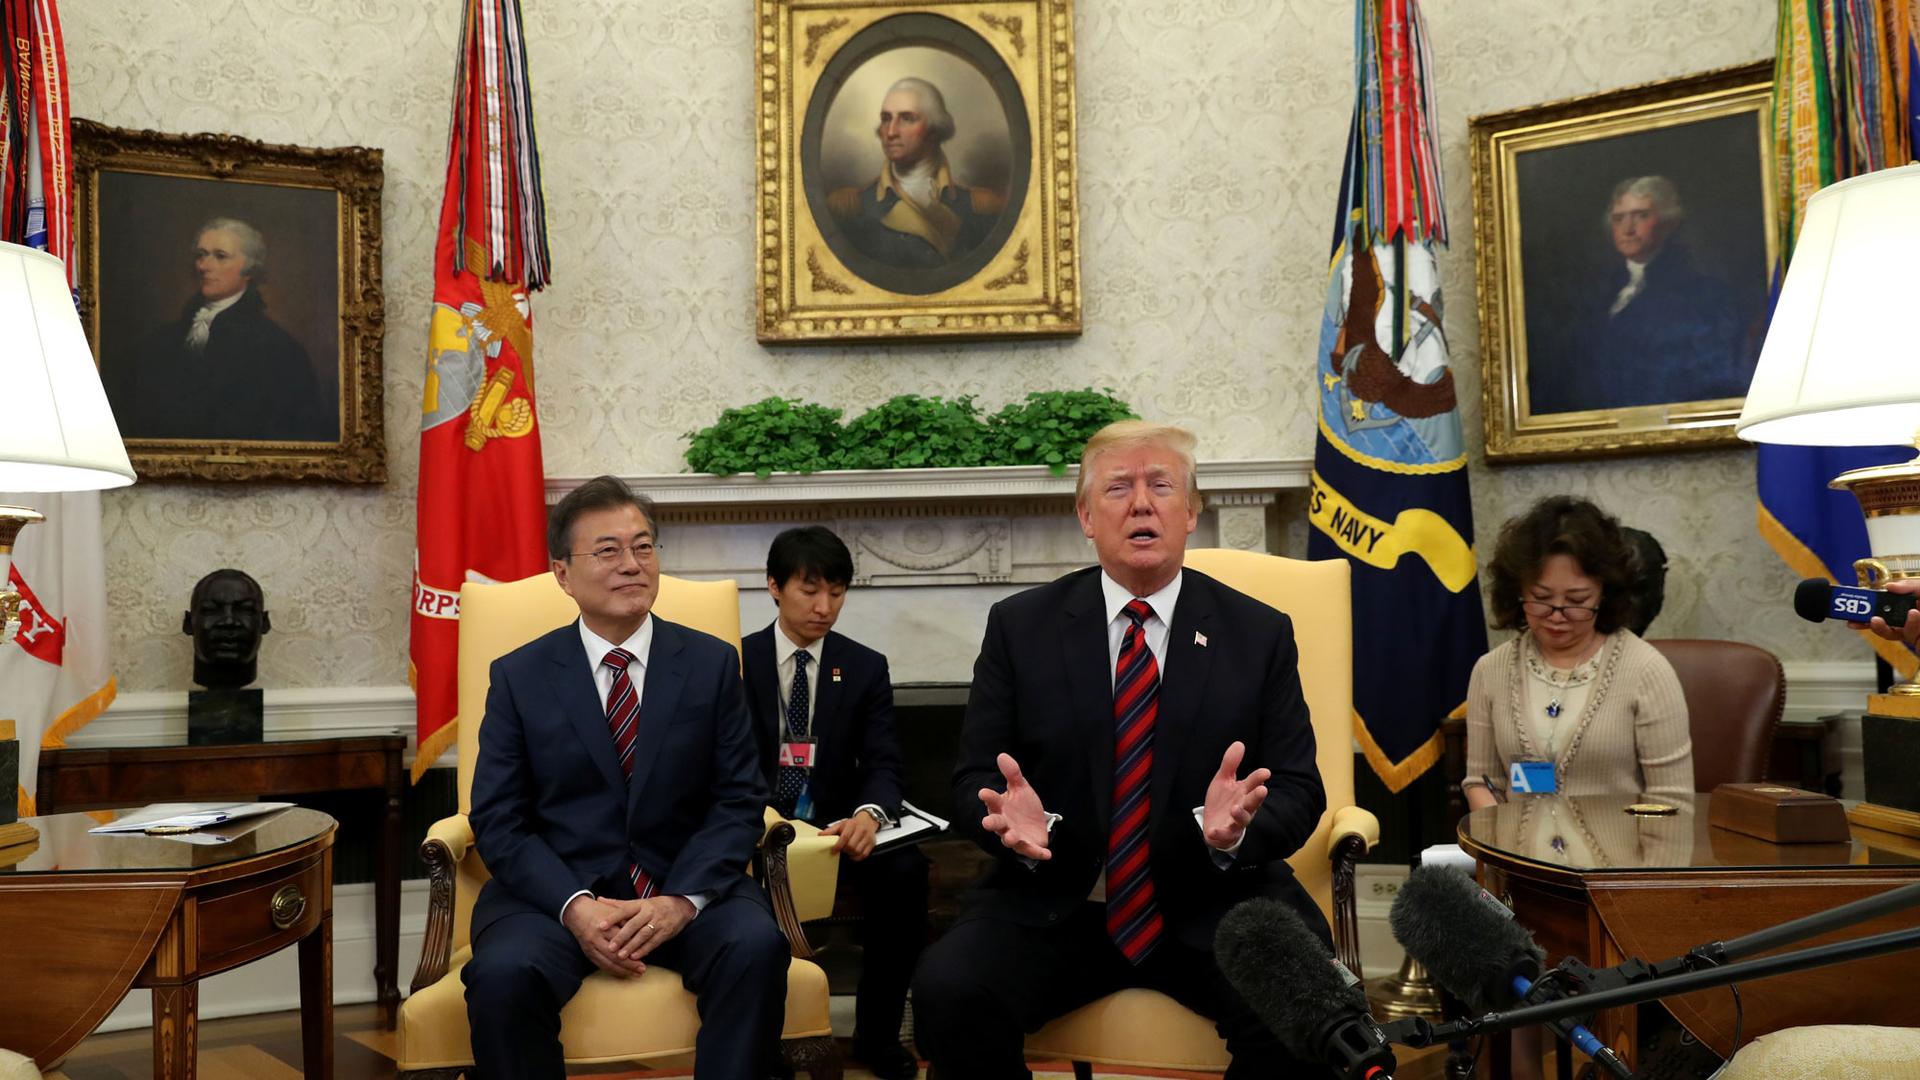 Donald Trump and Moon Jae-In sit in large chairs in the White House